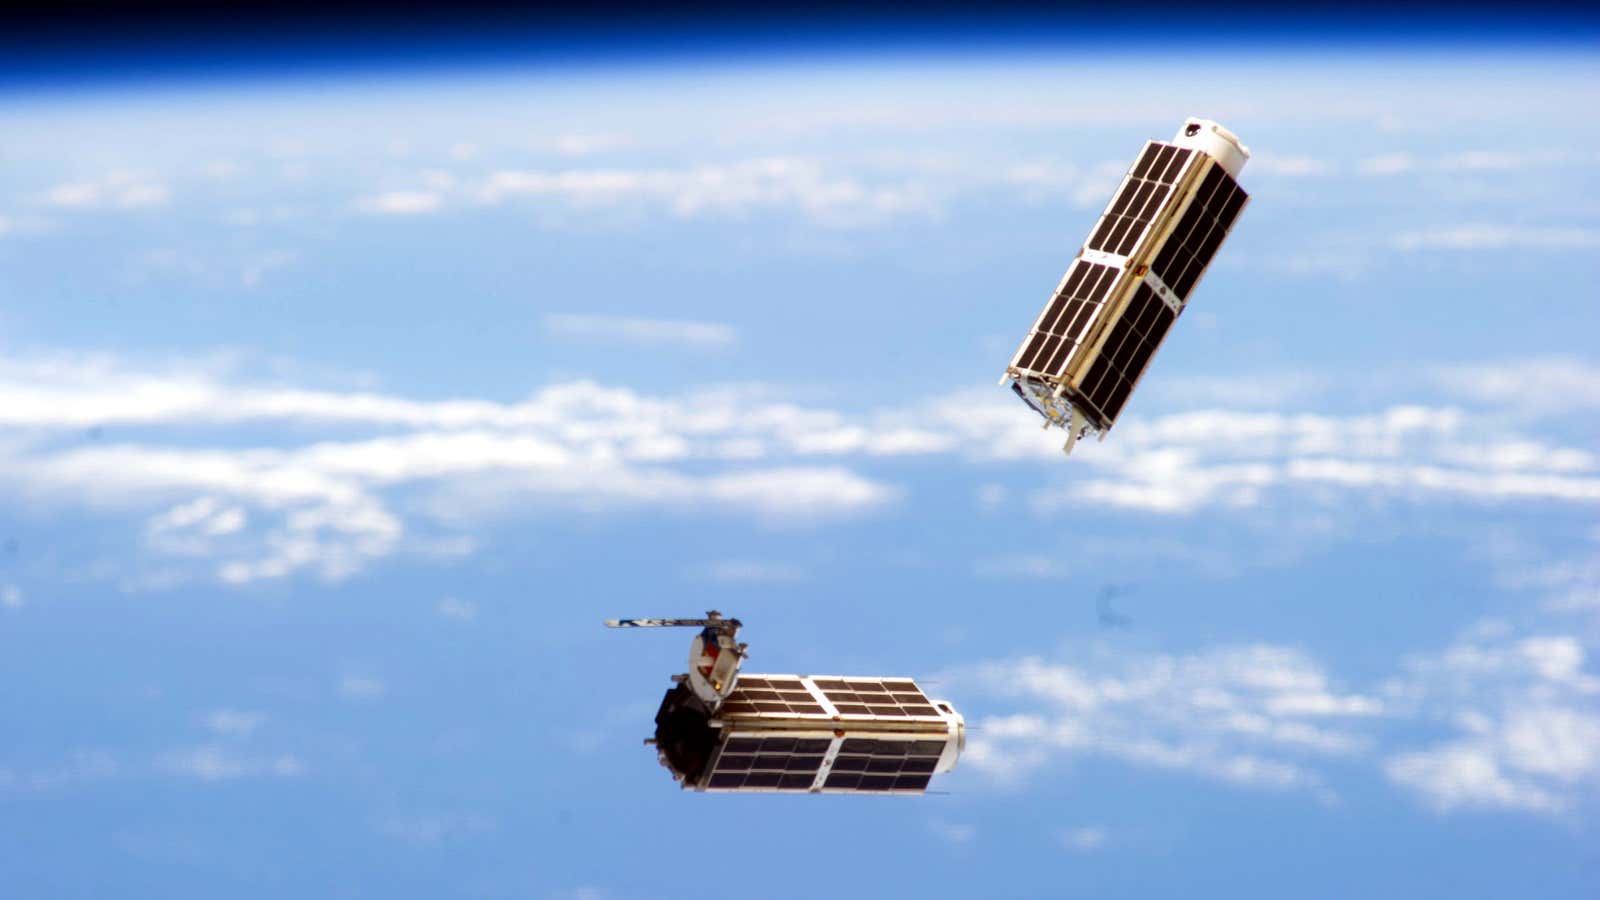 Two of the new generation of small satellites in orbit after being deployed from the International Space Station.